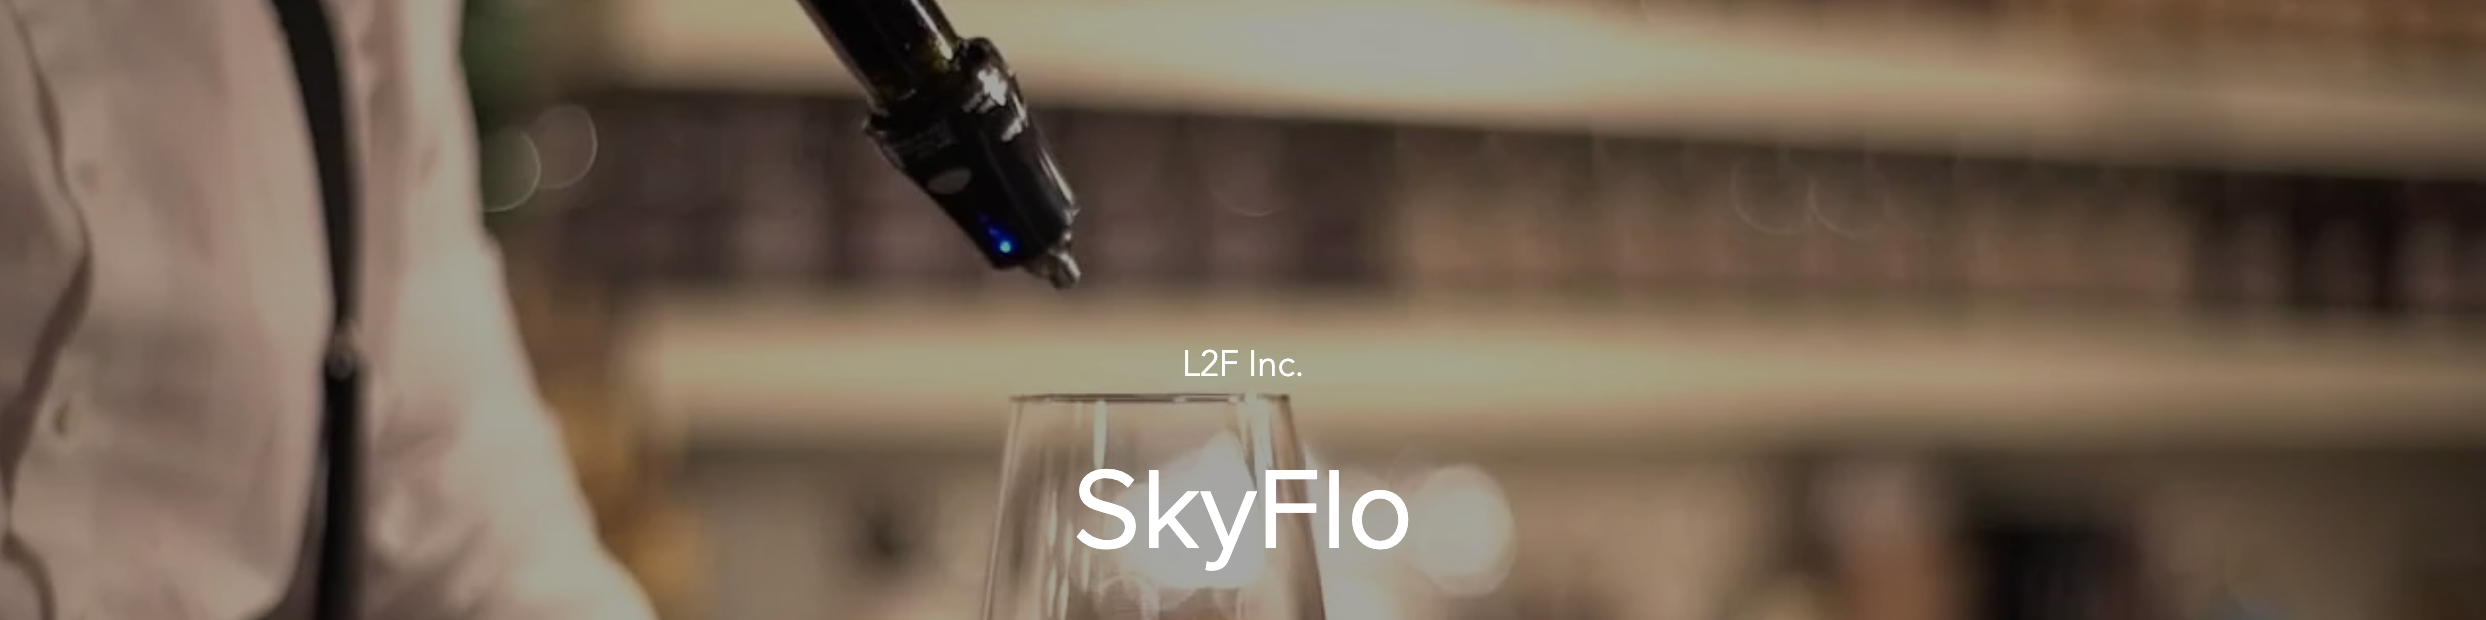 Measure the Perfect Pour with the SkyFlo Liquor Management System